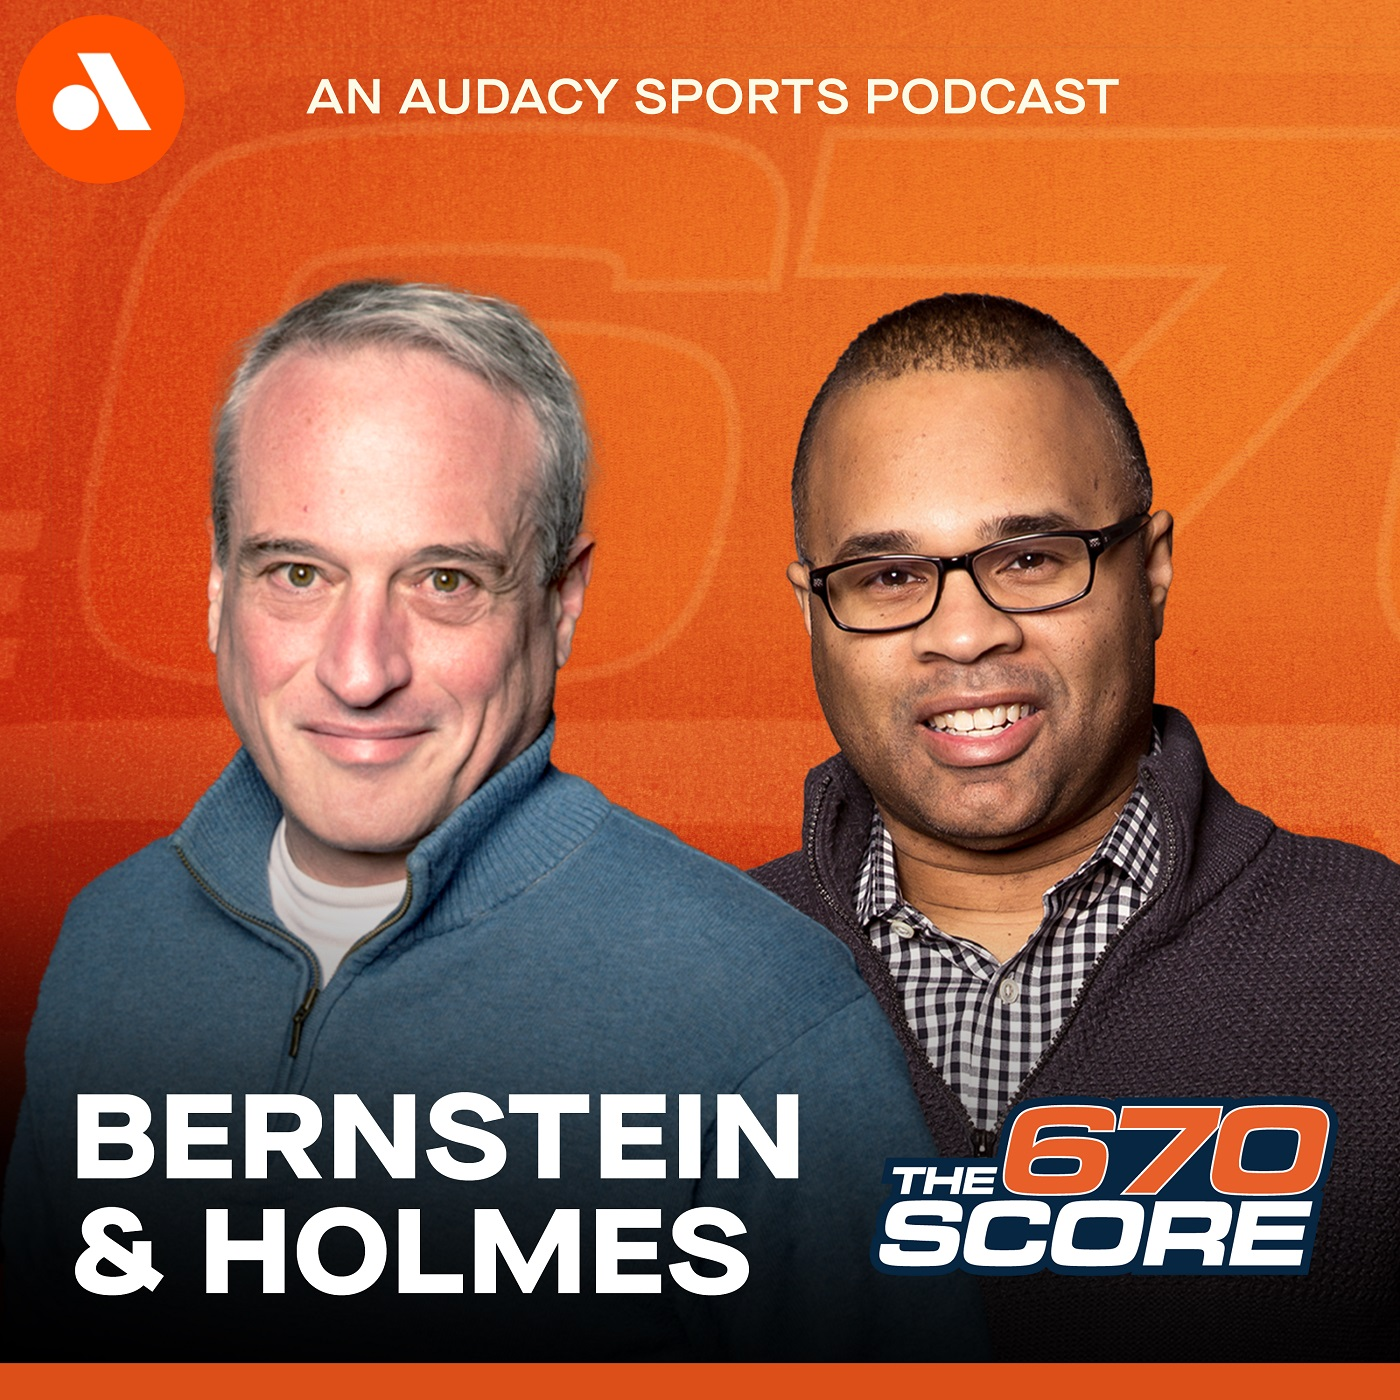 Terry Boers celebrates 29 years of Dan Bernstein at The Score, start of year 30